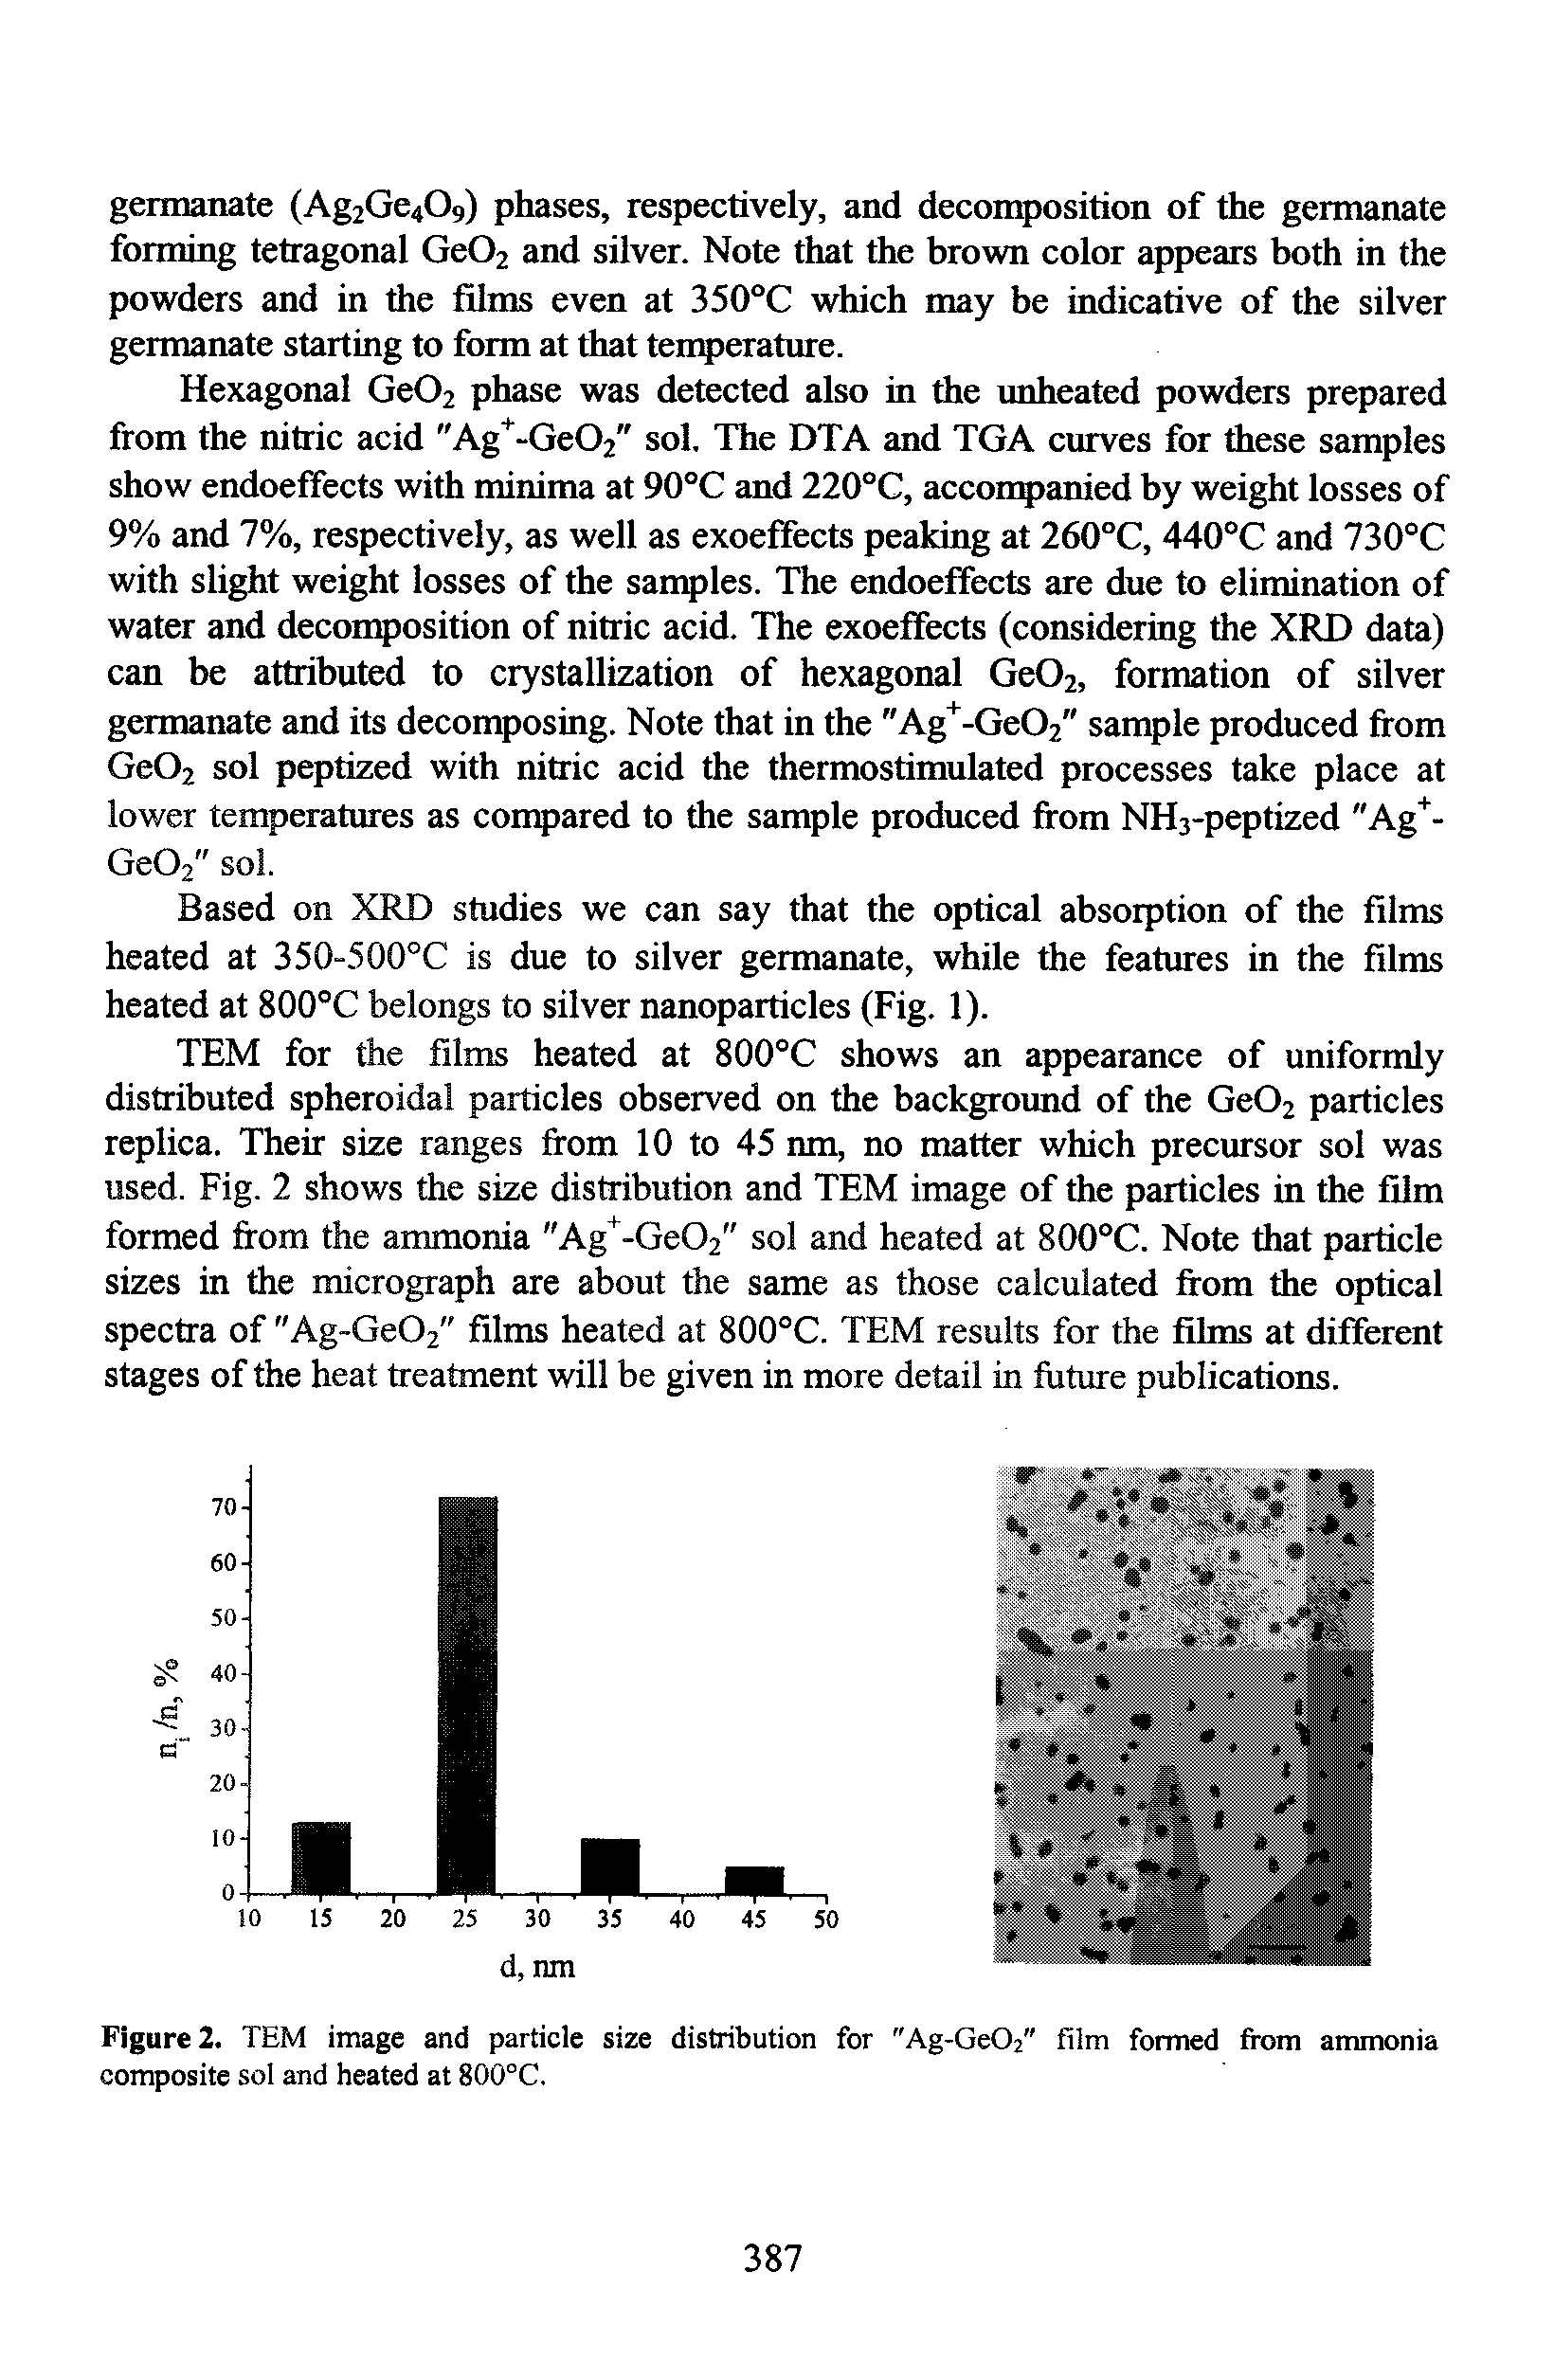 Figure 2. TEM image and particle size distribution for "Ag-GeOa" film formed from ammonia composite sol and heated at 800°C.